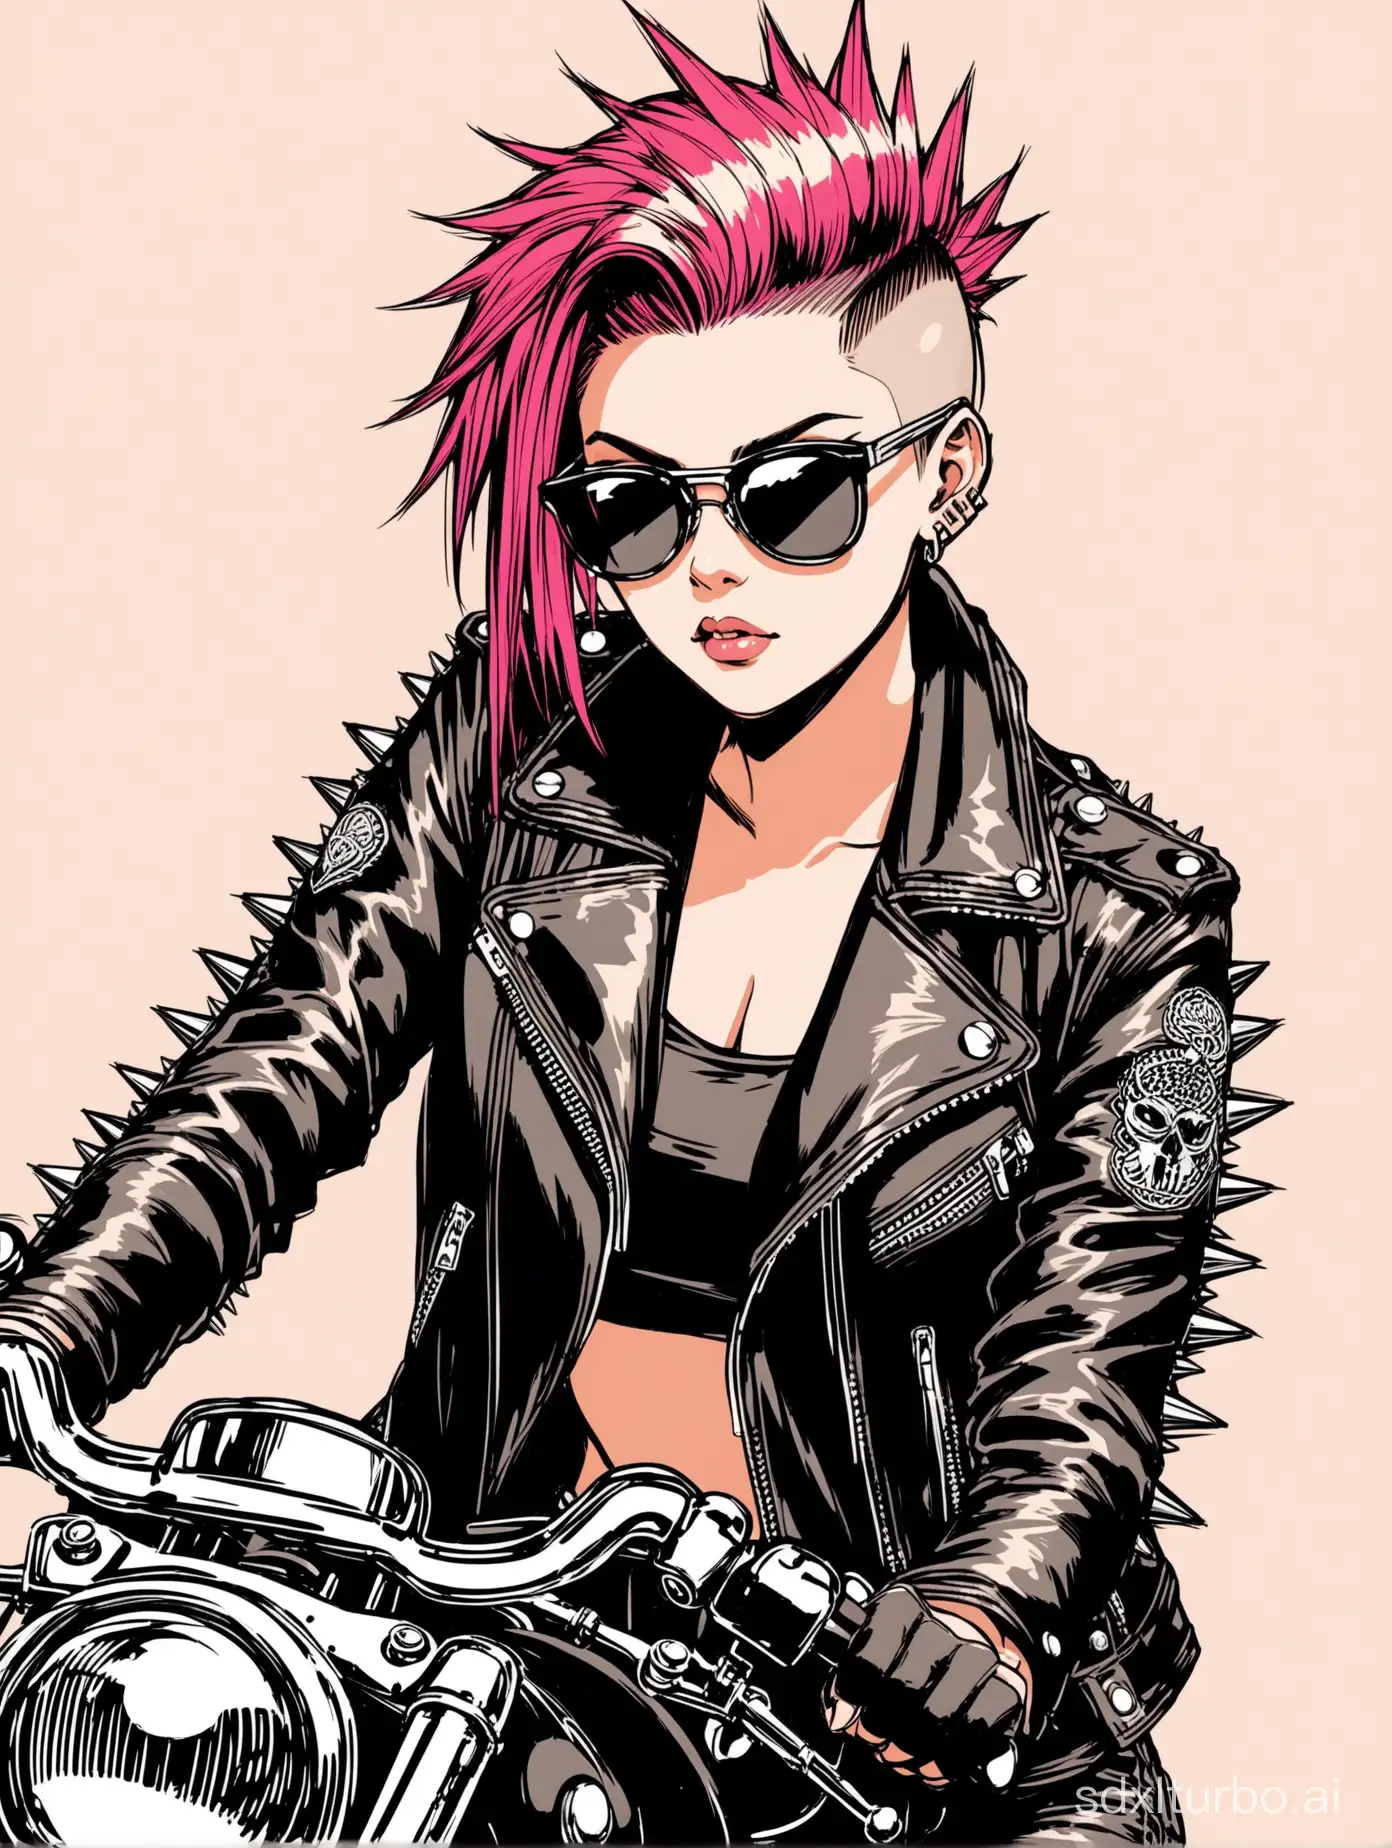 Cool-Girl-with-Mohawk-on-Motorcycle-Aesthetic-Beauty-Drawing